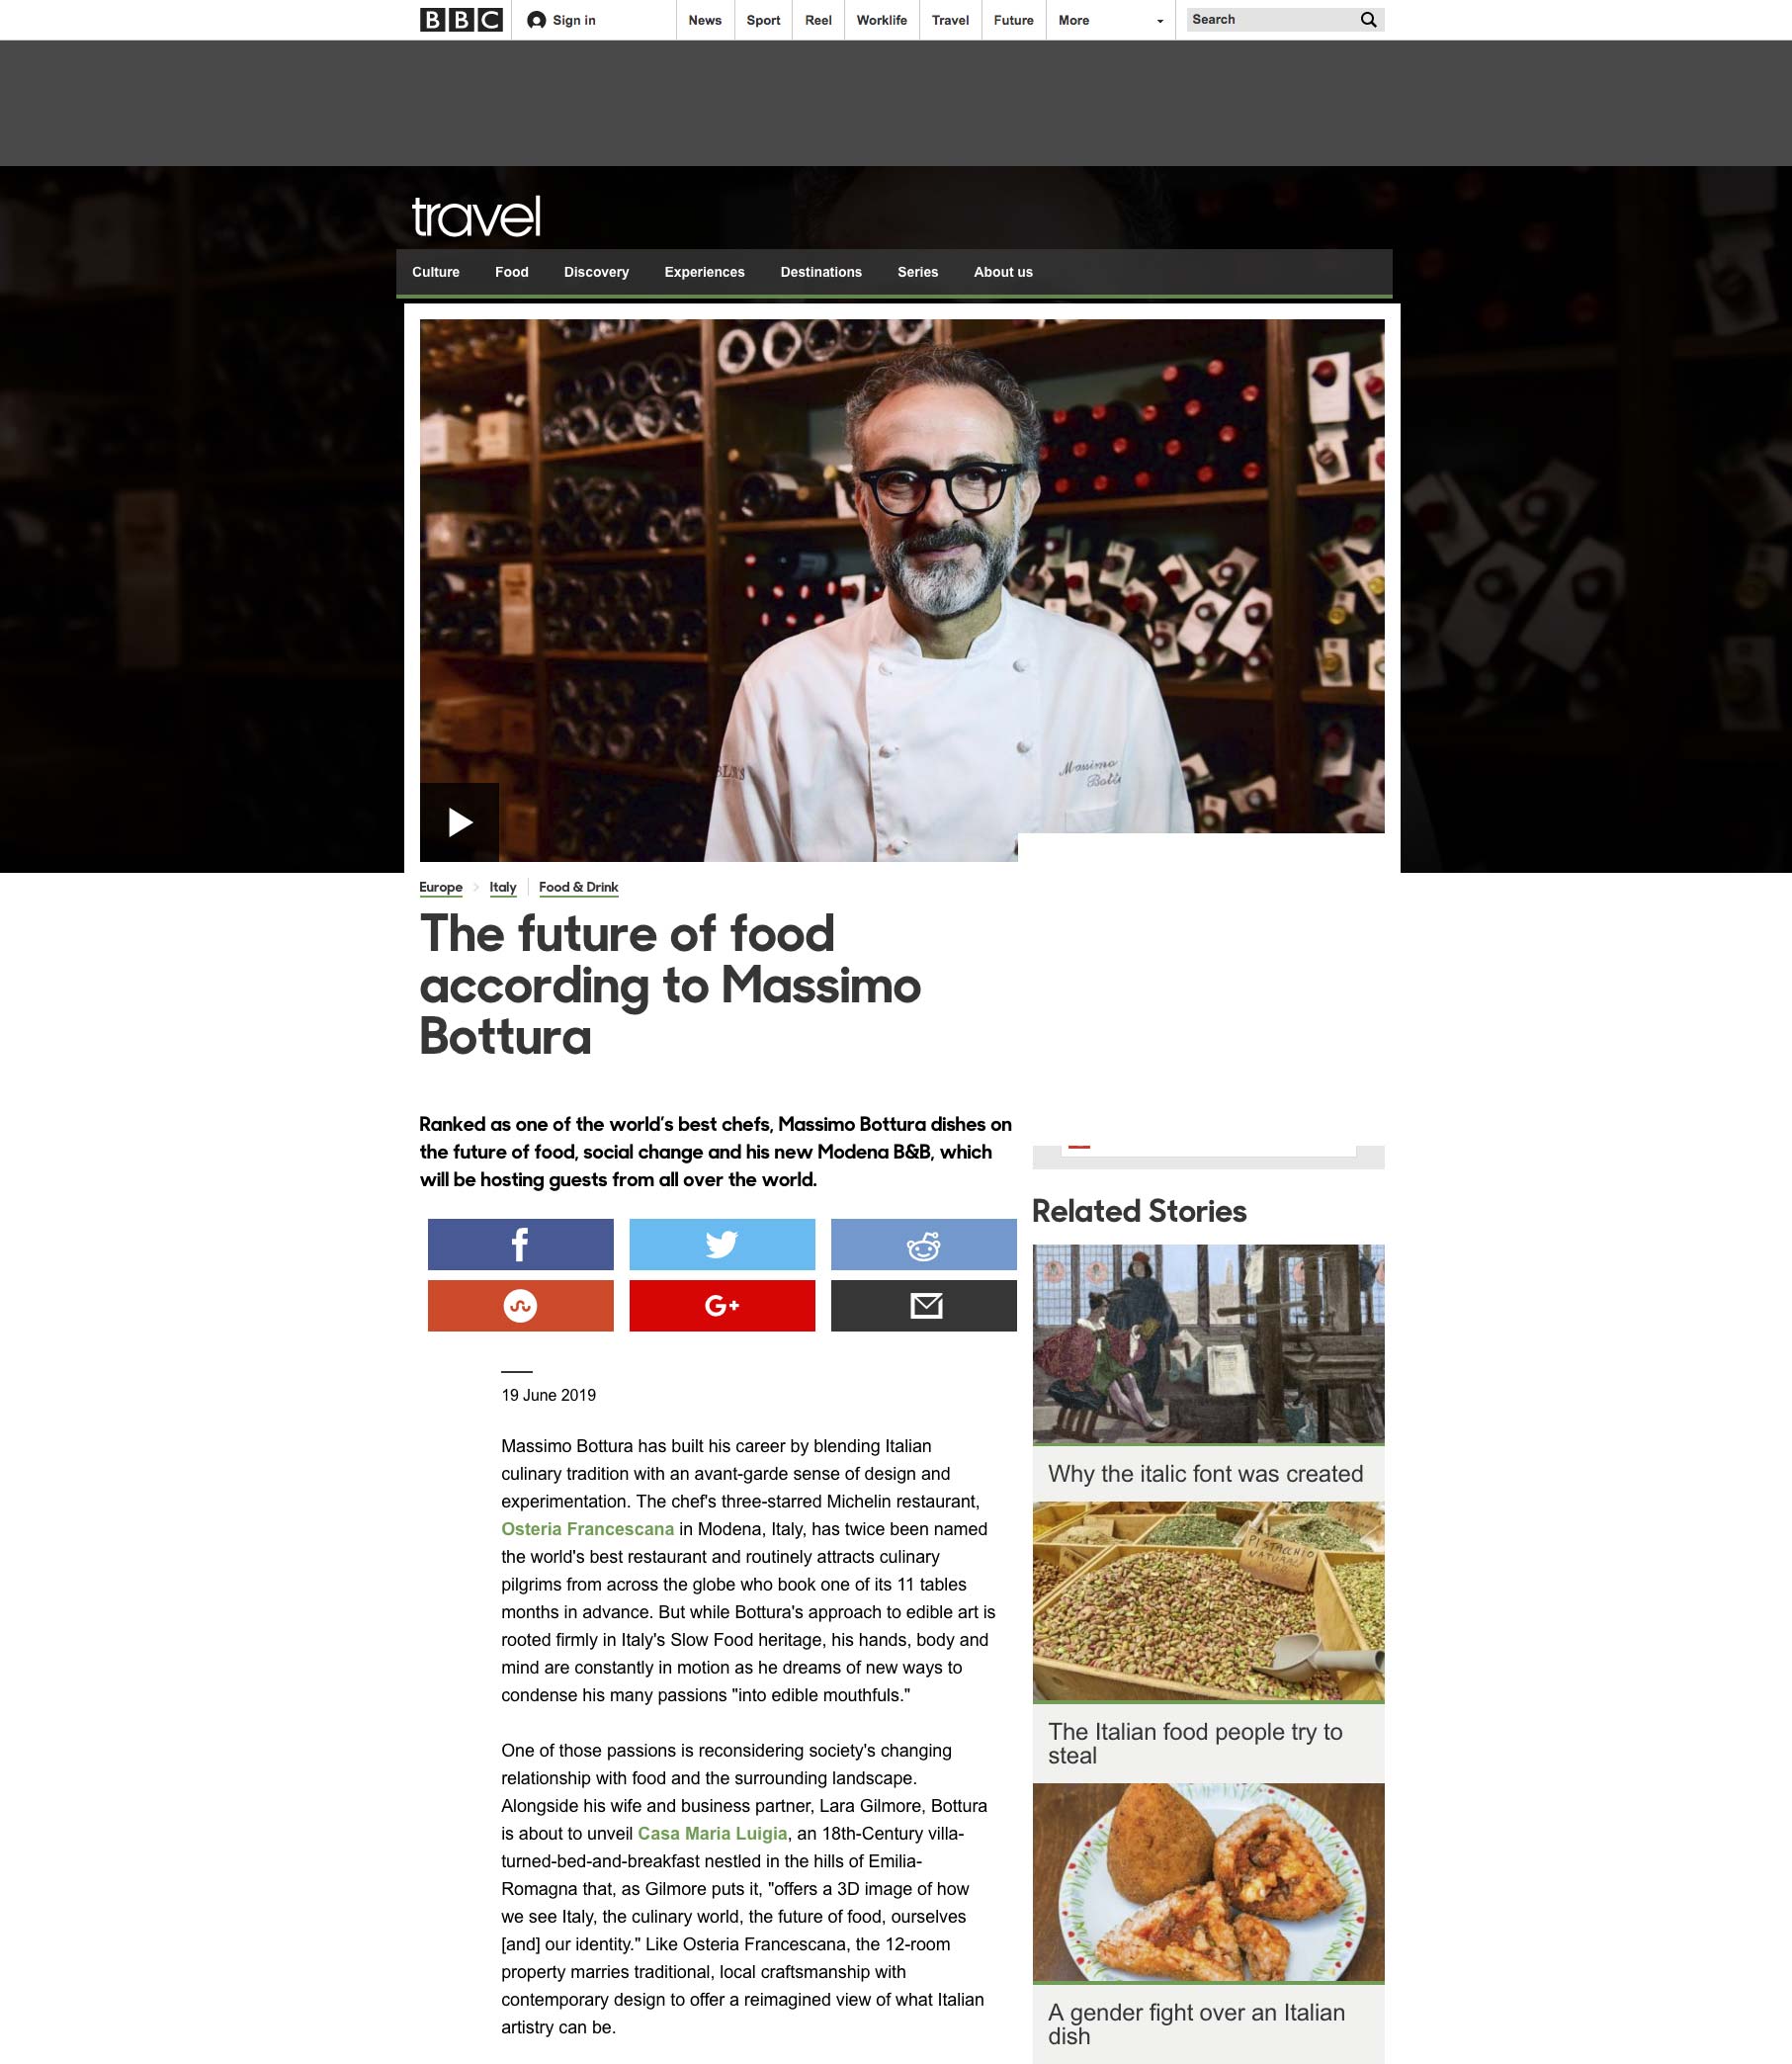 BBCThe future of food according to Massimo Bottura